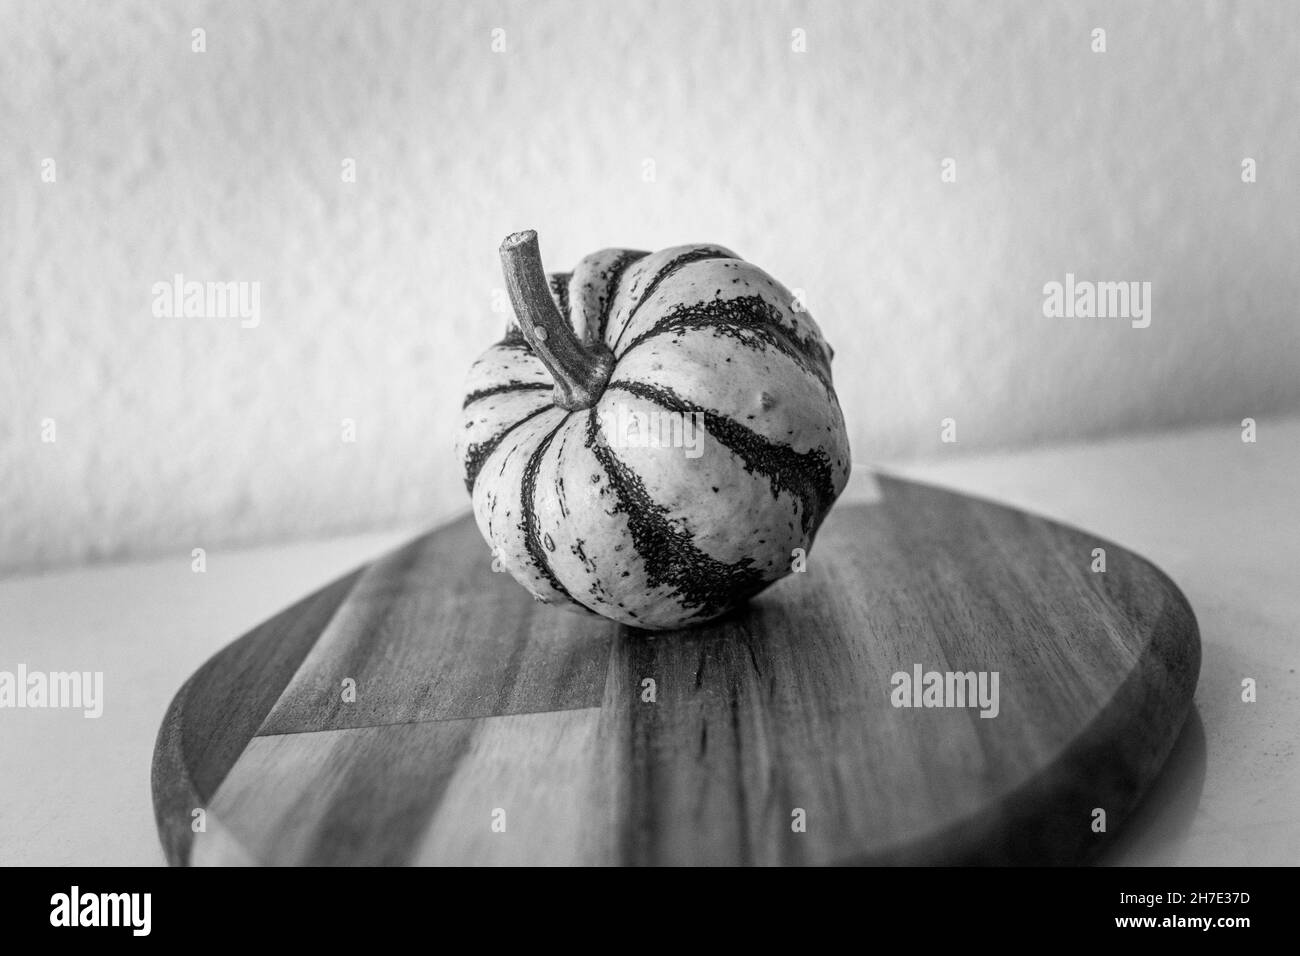 a cream and green mini pumpkin standing on a wooden chopping board monochrome Stock Photo